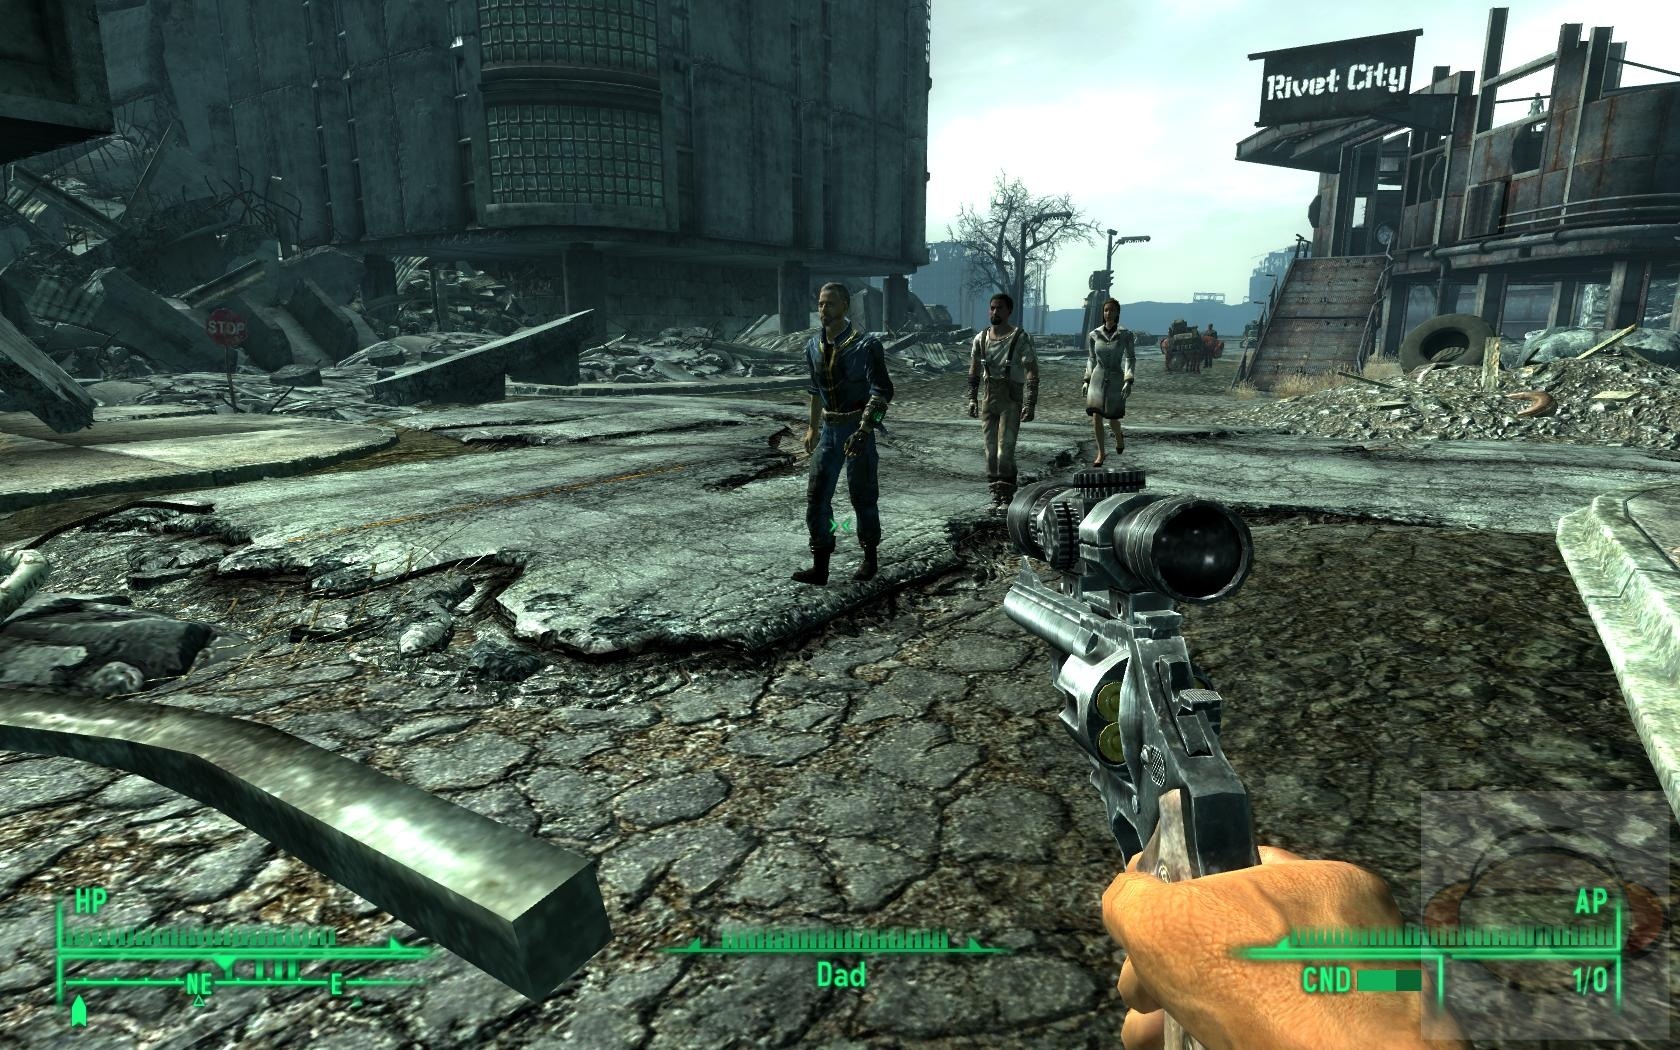 windowslivewriterfallout3pcreview-11002fallout3-2008-11-18-20-57-28-61-2.jpg